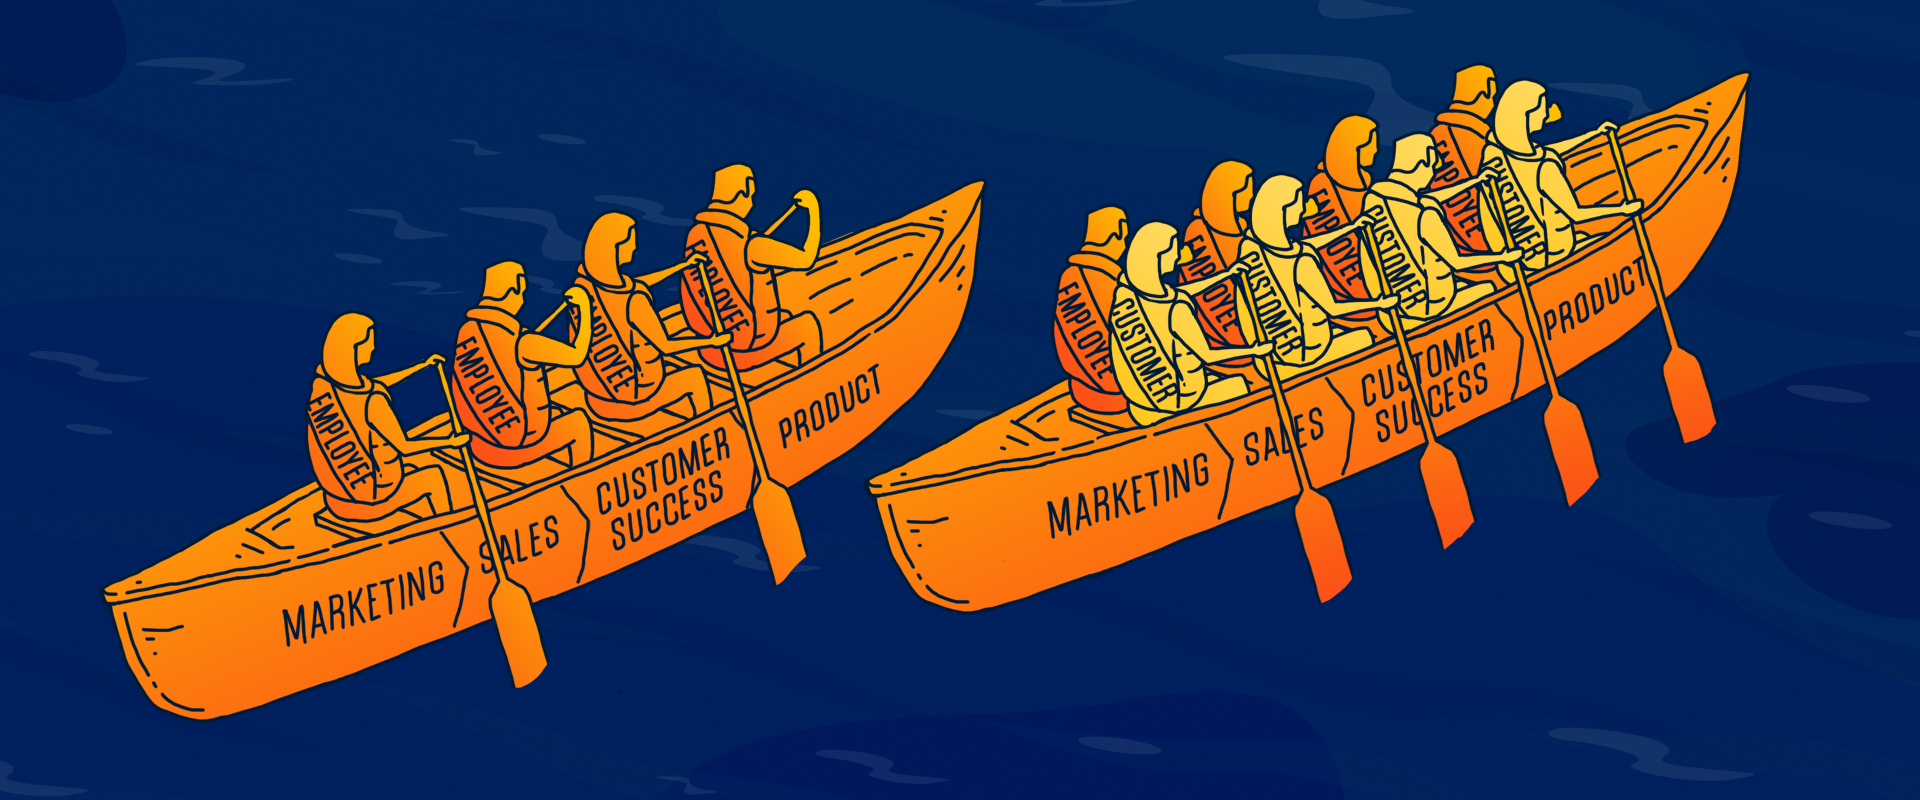 The boat with customers paddling alongside employees goes further, faster